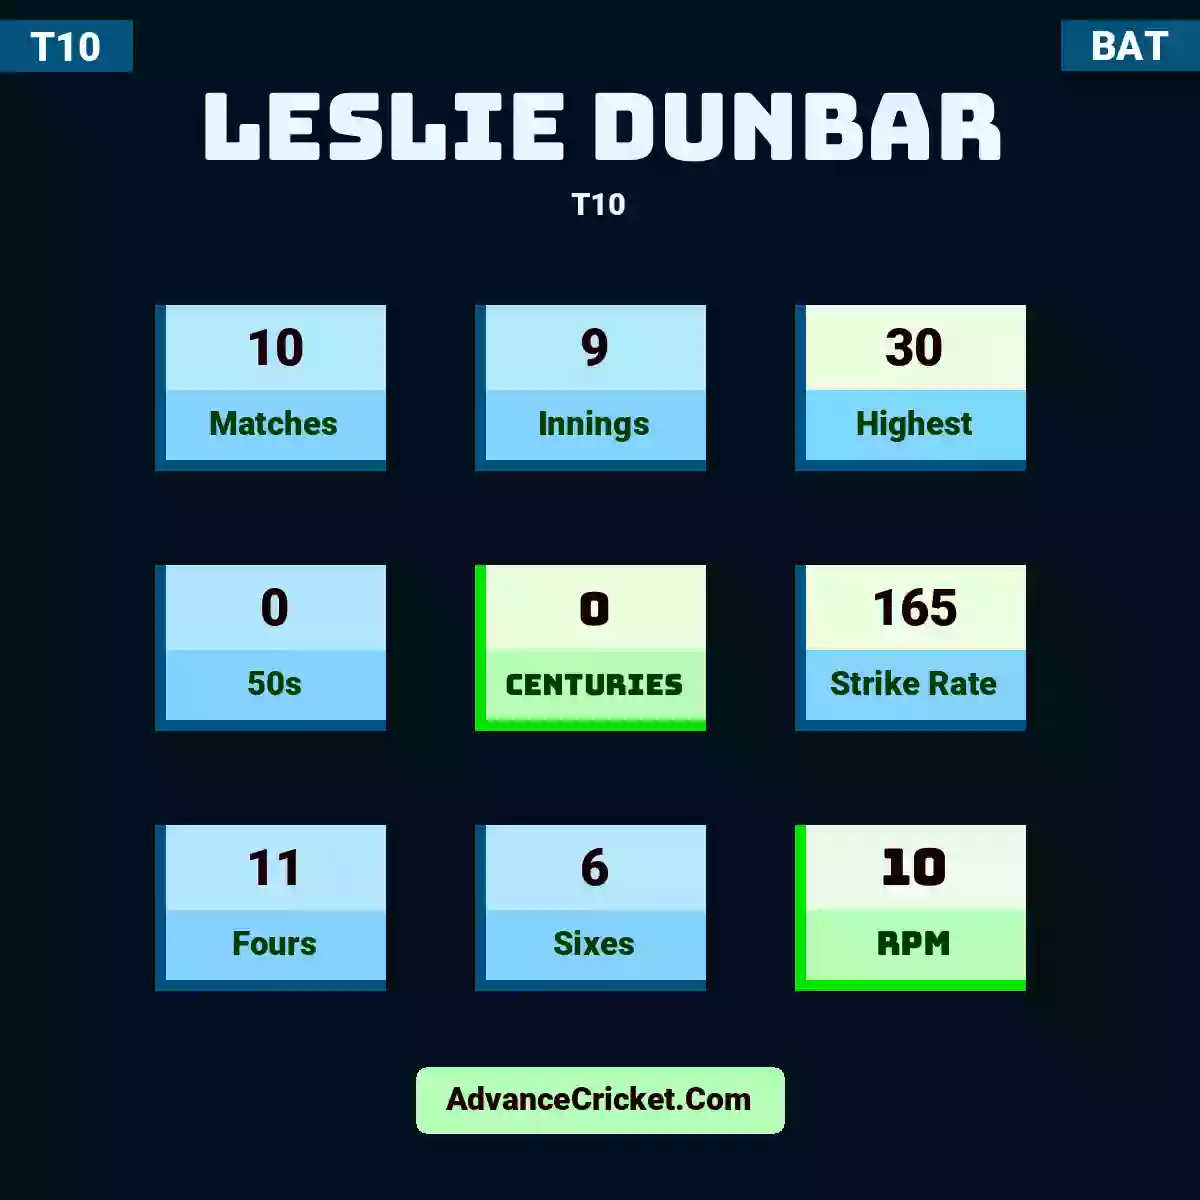 Leslie Dunbar T10 , Leslie Dunbar played 10 matches, scored 30 runs as highest, 0 half-centuries, and 0 centuries, with a strike rate of 165. L.Dunbar hit 11 fours and 6 sixes, with an RPM of 10.